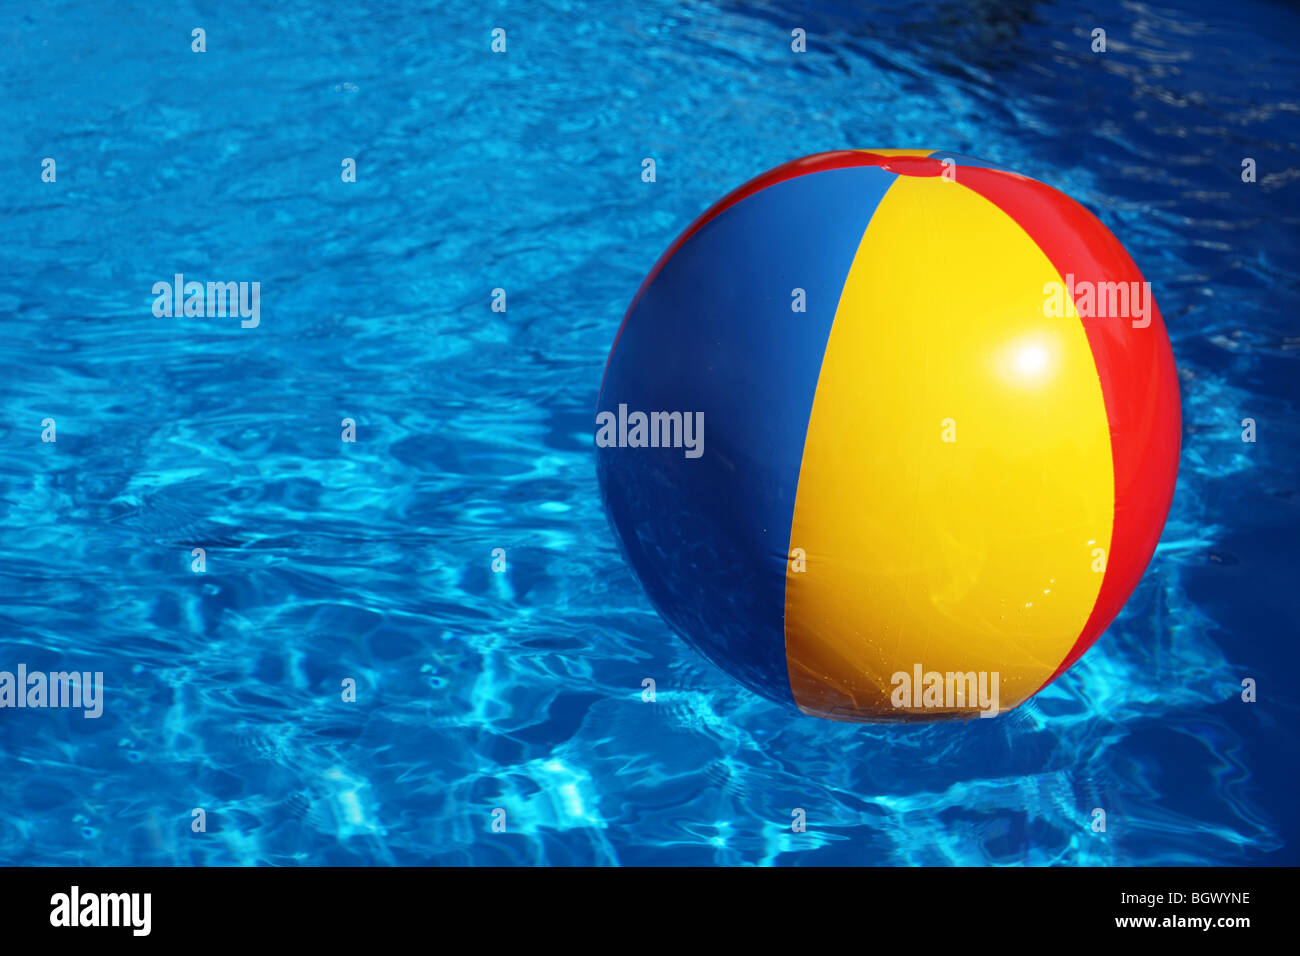 An inflatable colored plastic ball swimming in a shiny blue swimming pool. Stock Photo